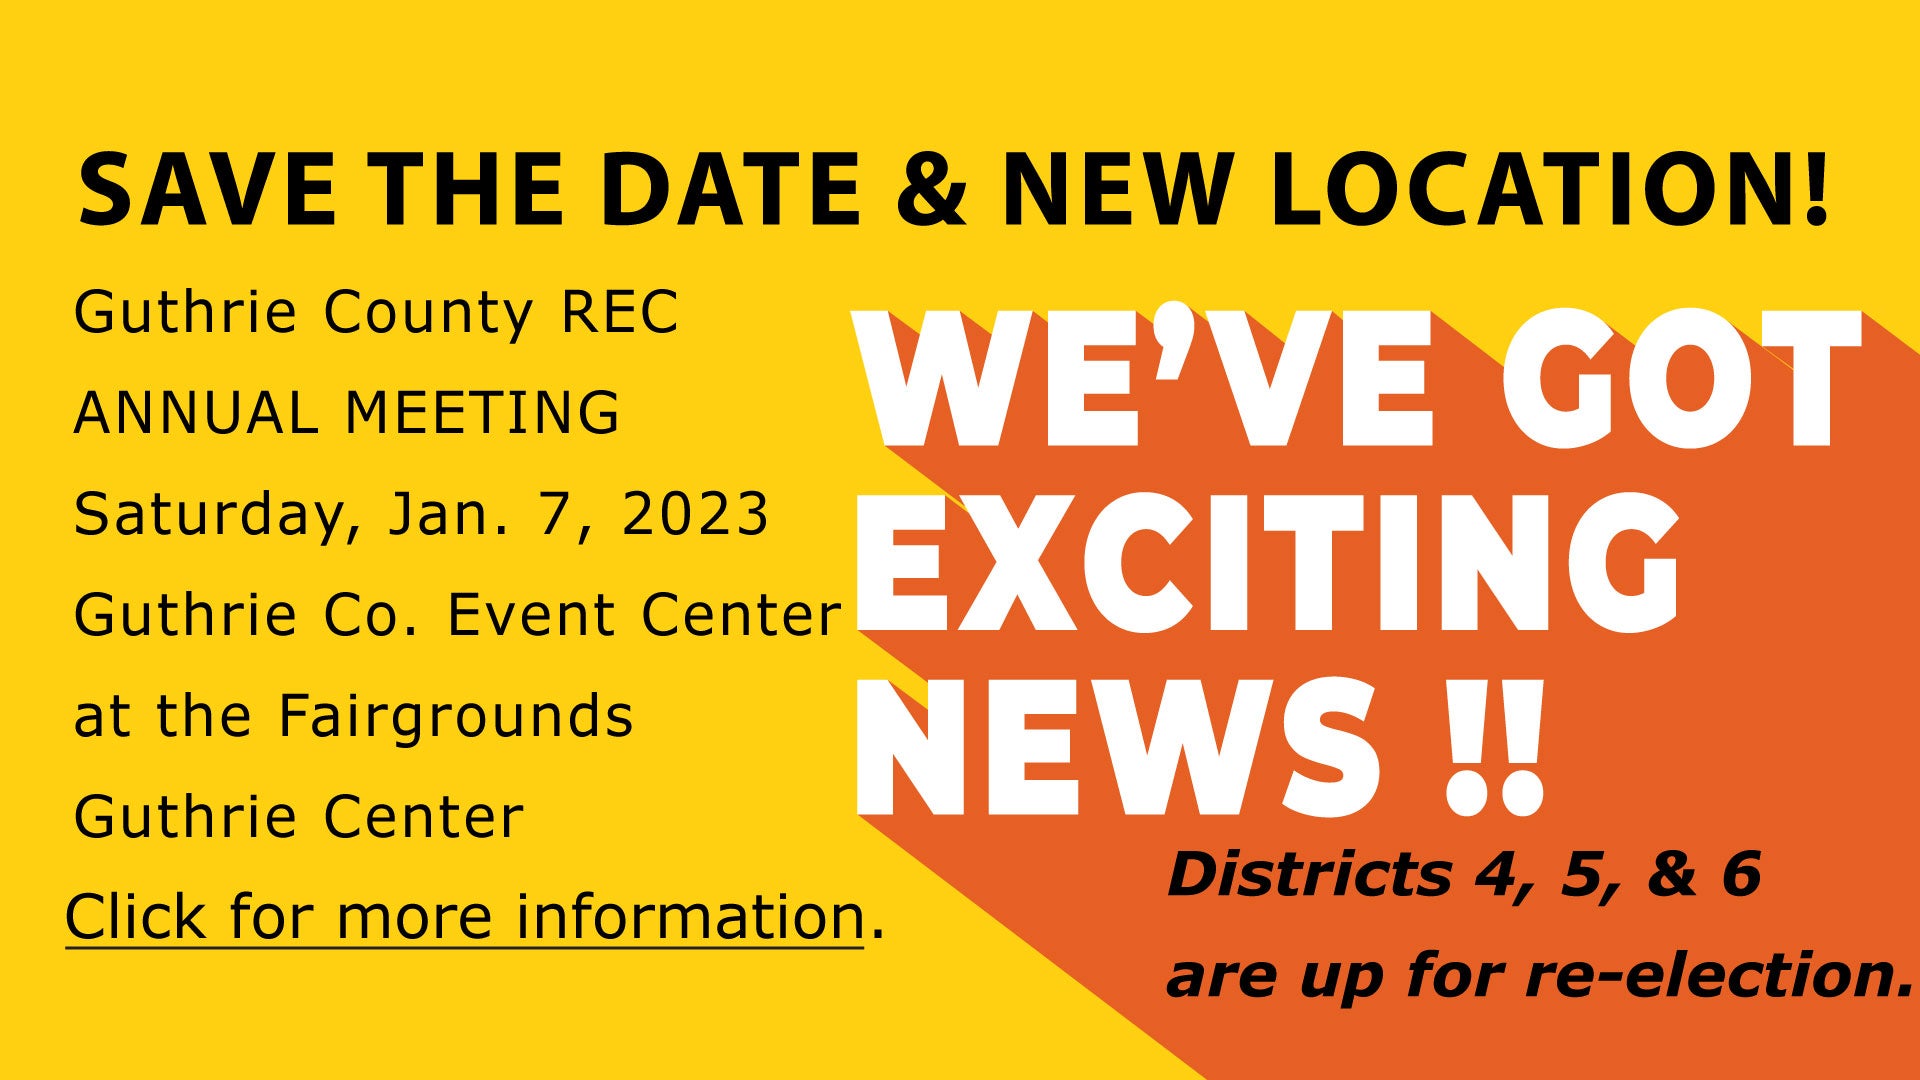 Annual Meeting notice - More information